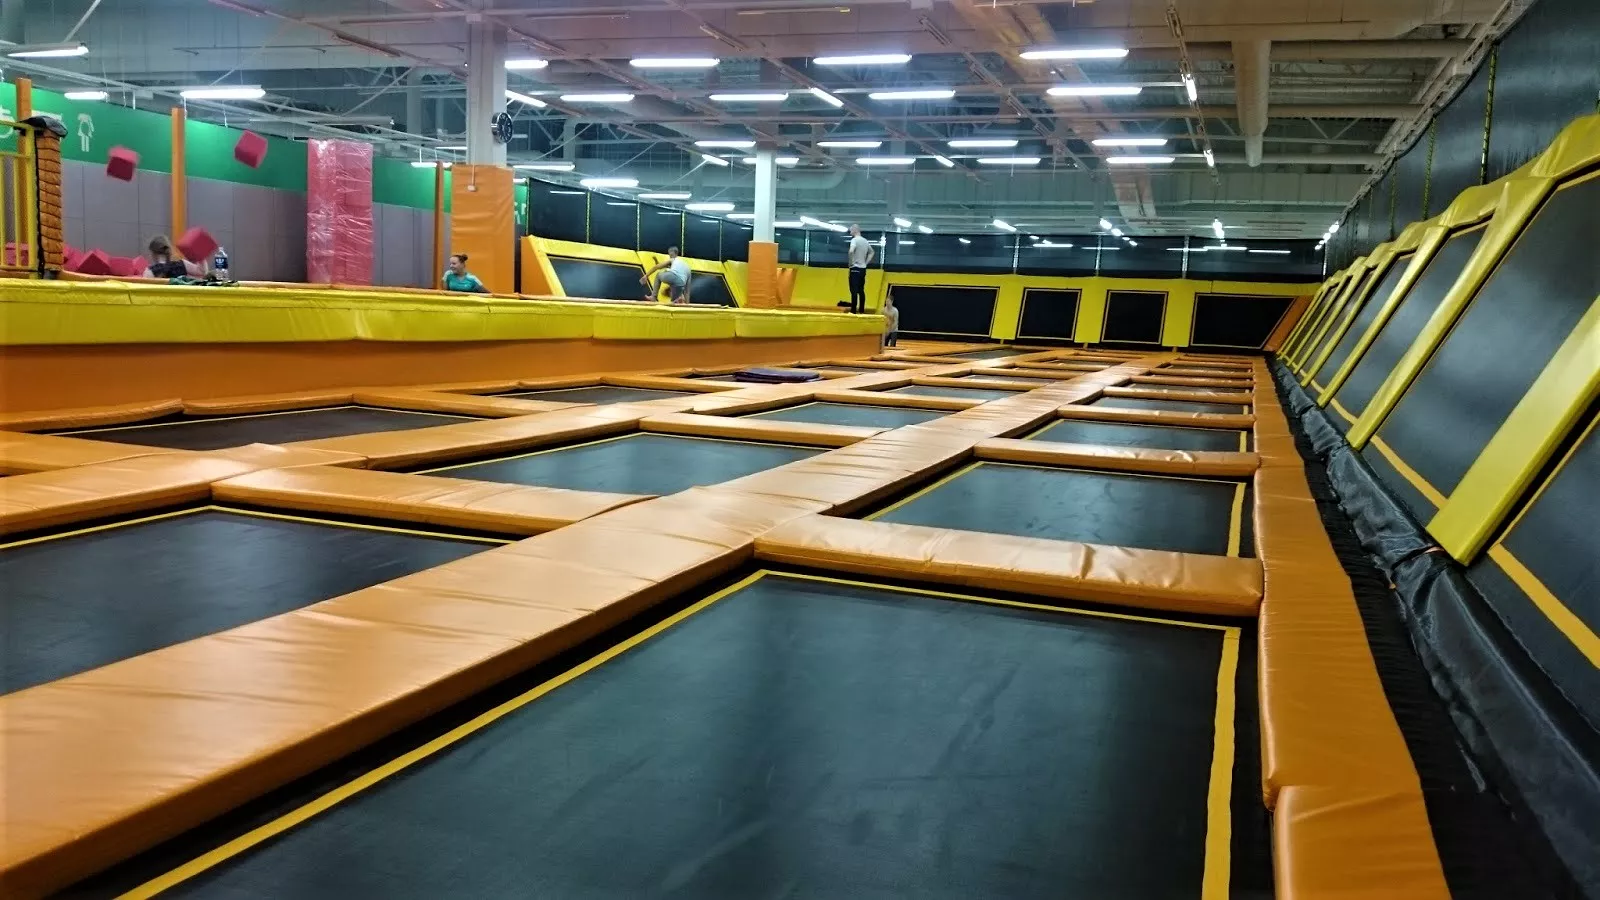 Jump Space Trampoline Park in Lithuania, Europe | Trampolining - Rated 5.1